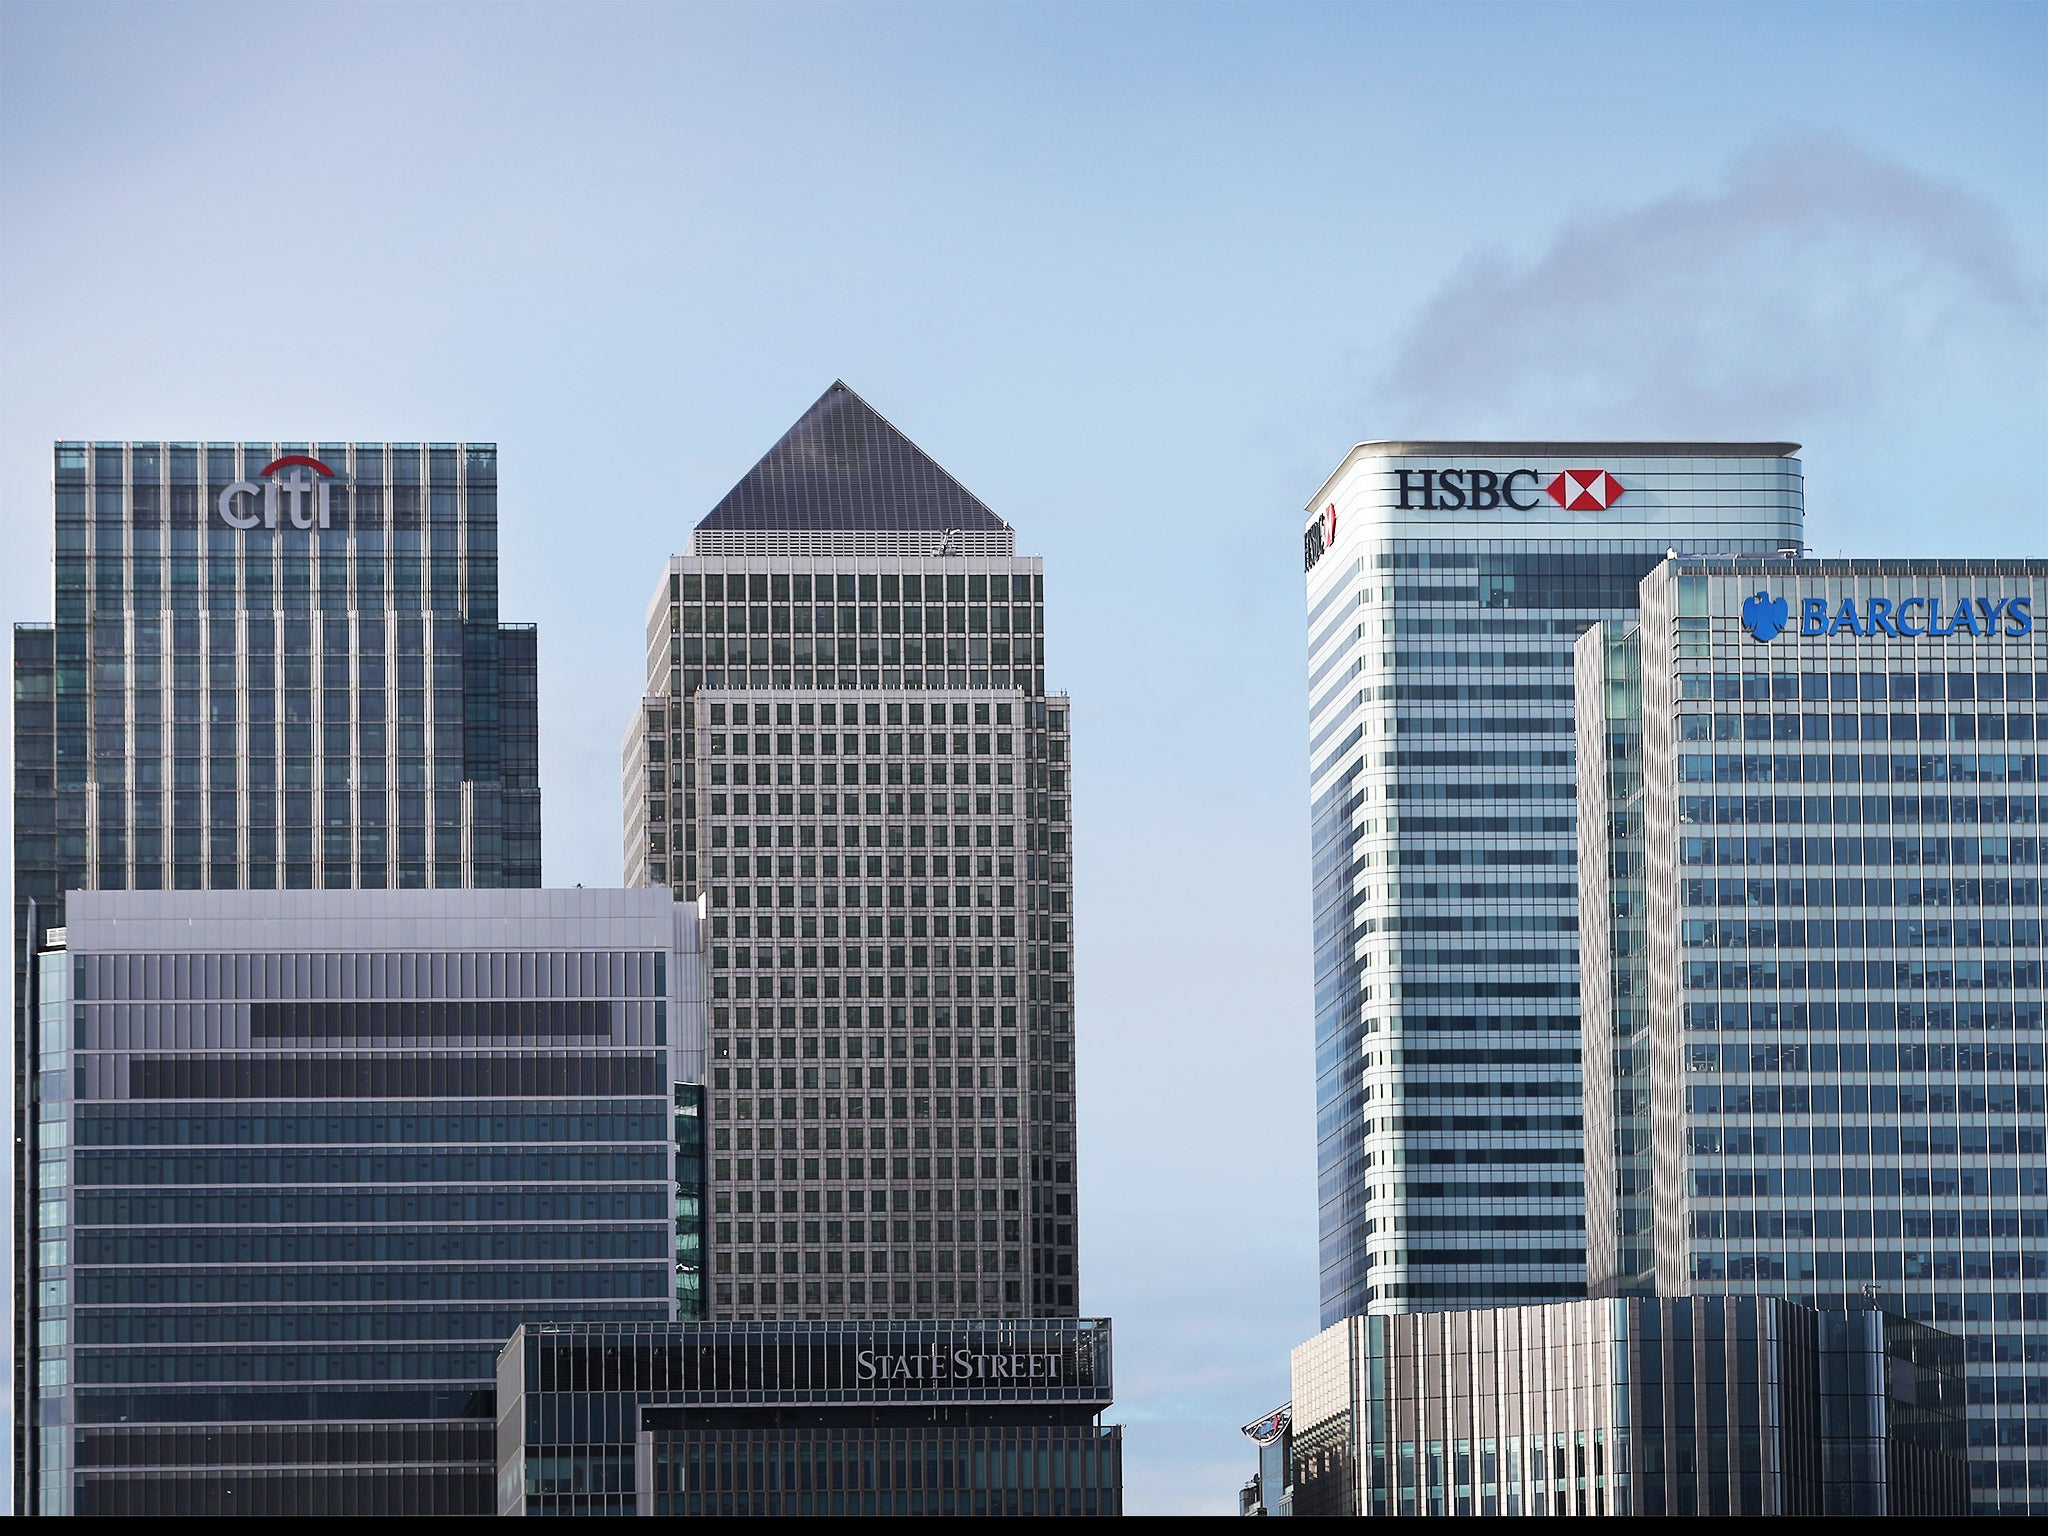 UK-based banks, including HSBC, have insisted that they do not help their clients to avoid tax